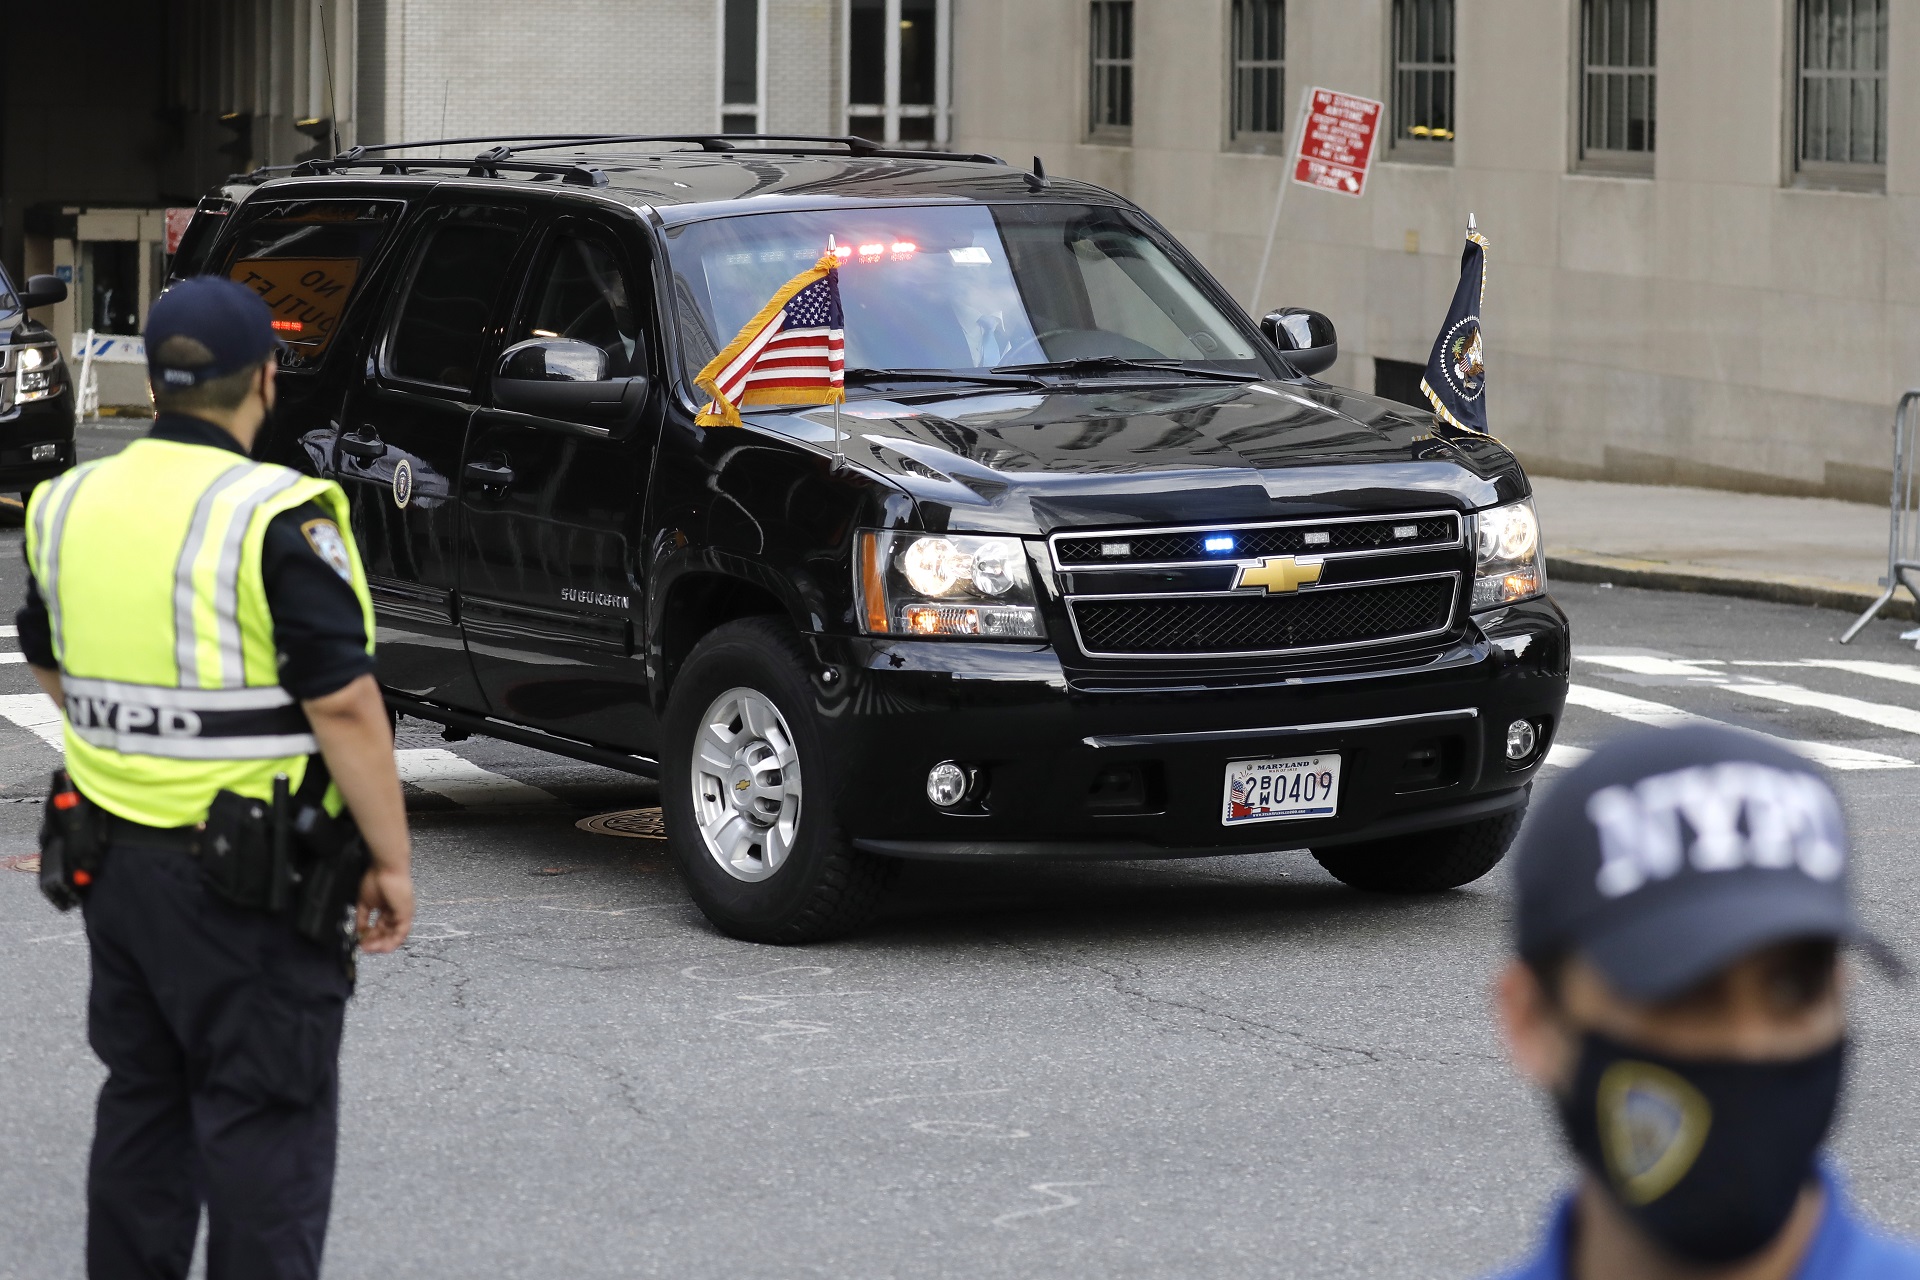 epa08604523 US President Donald J. Trump's motorcade departs New York Presbyterian Hospital in New York, New York, USA, 14 August 2020. 
President Trump was here to visit his younger brother, Robert Trump, 72, who according to the White House is seriously ill. President Trump was not transported in the the traditional 'Beast' Limousine.  EPA/Peter Foley